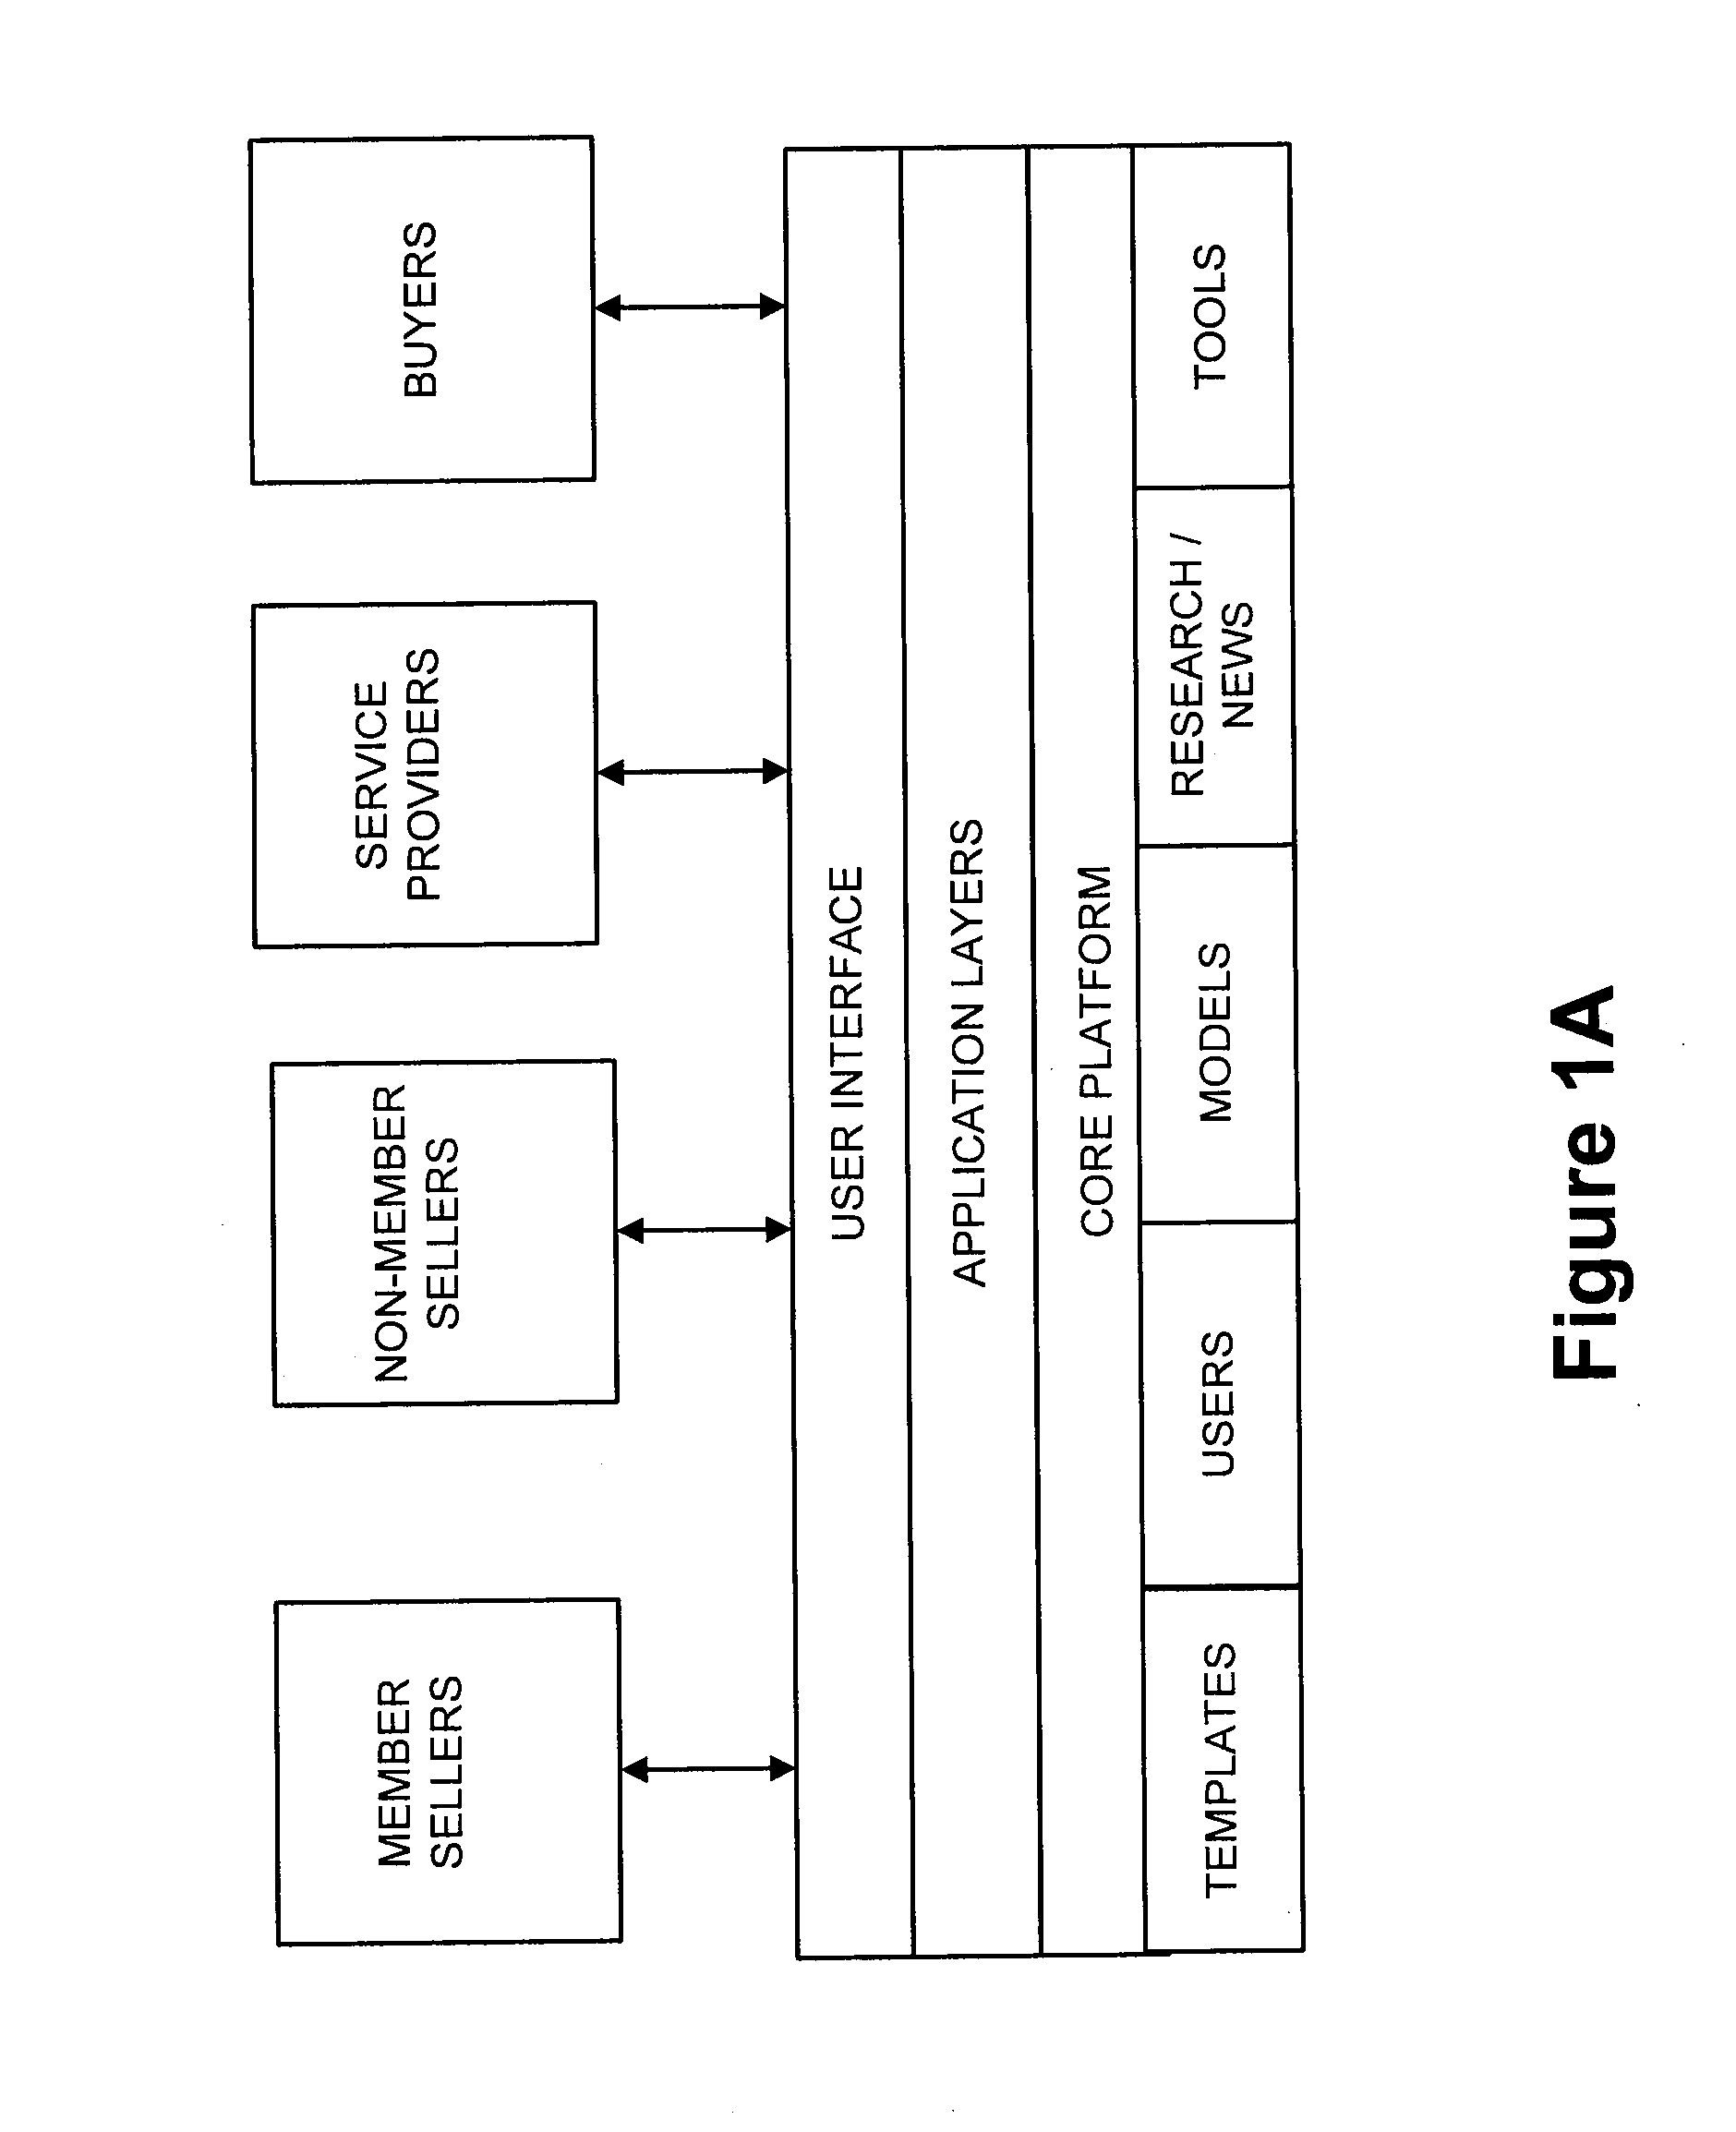 System and method for collecting and validating intellectual property asset data